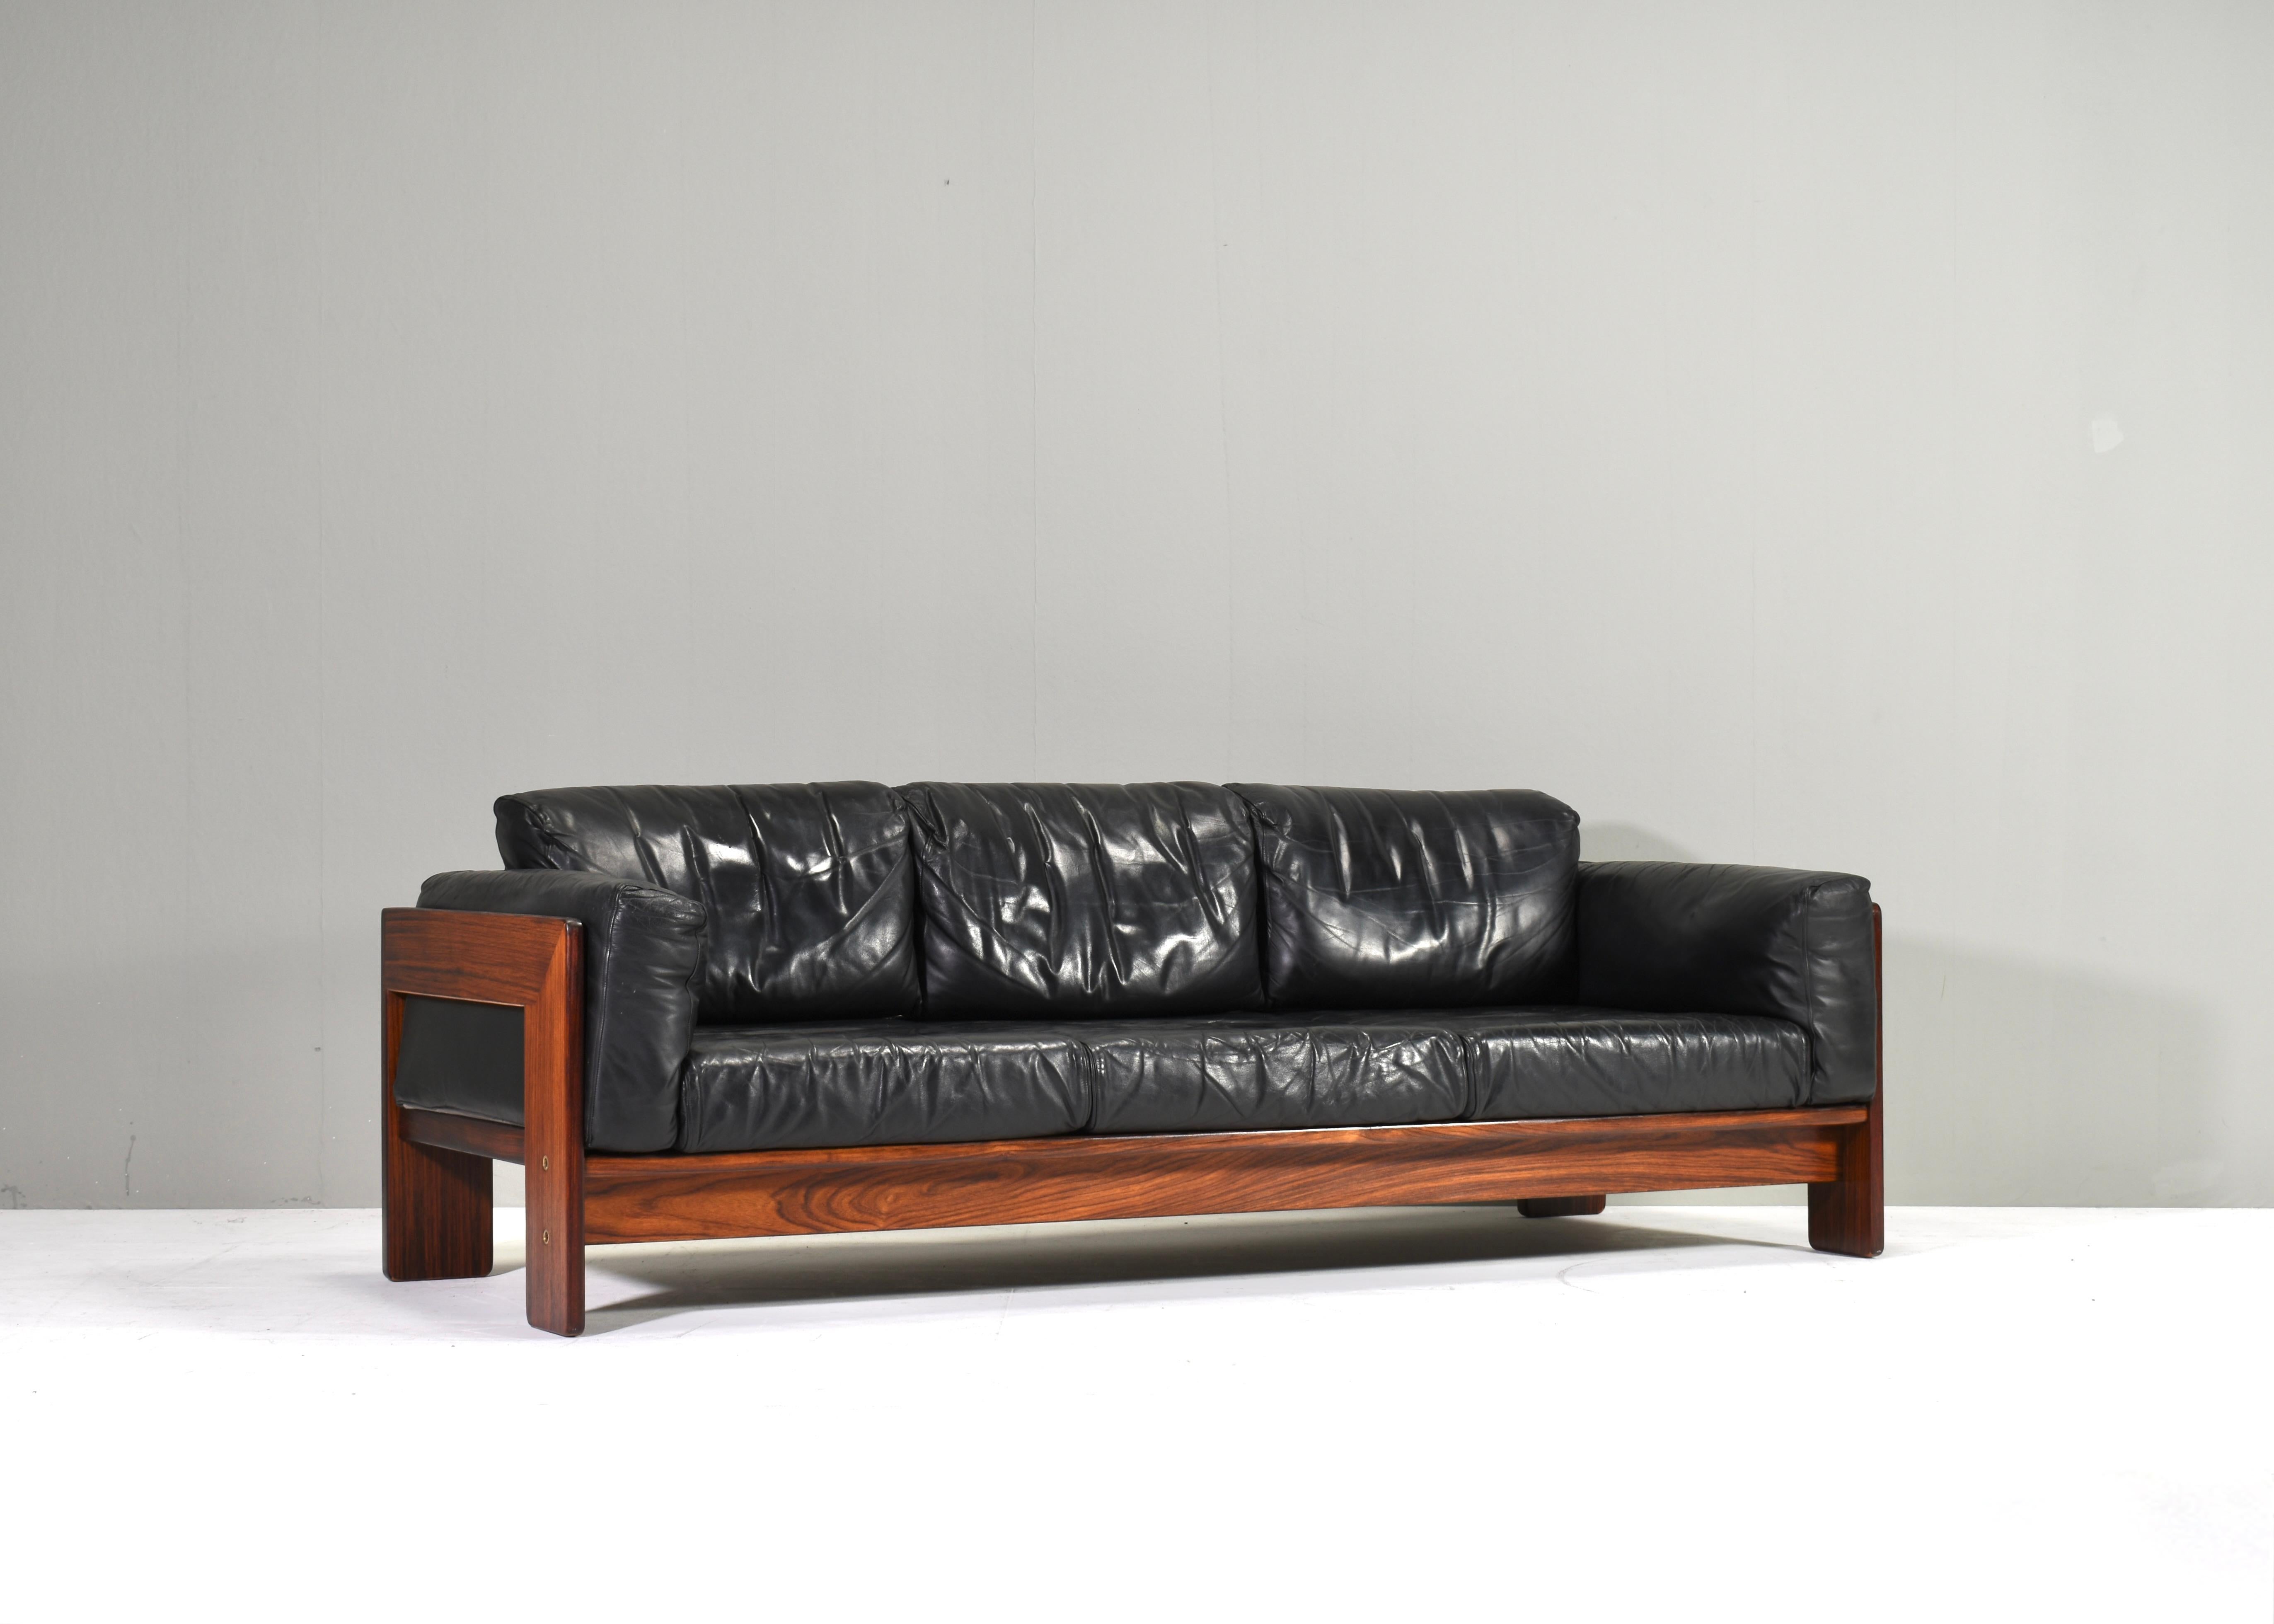 BASTIANO Sofa in black leather and solid walnut by Afra and Tobia Scarpa for KNOLL – Italy, 1962

Designer: Afra and Tobia Scarpa
Manufacturer: KNOLL
Country: Italy
Model: Bastiano three seat sofa
Design period: 1975
Date of manufacturing: circa